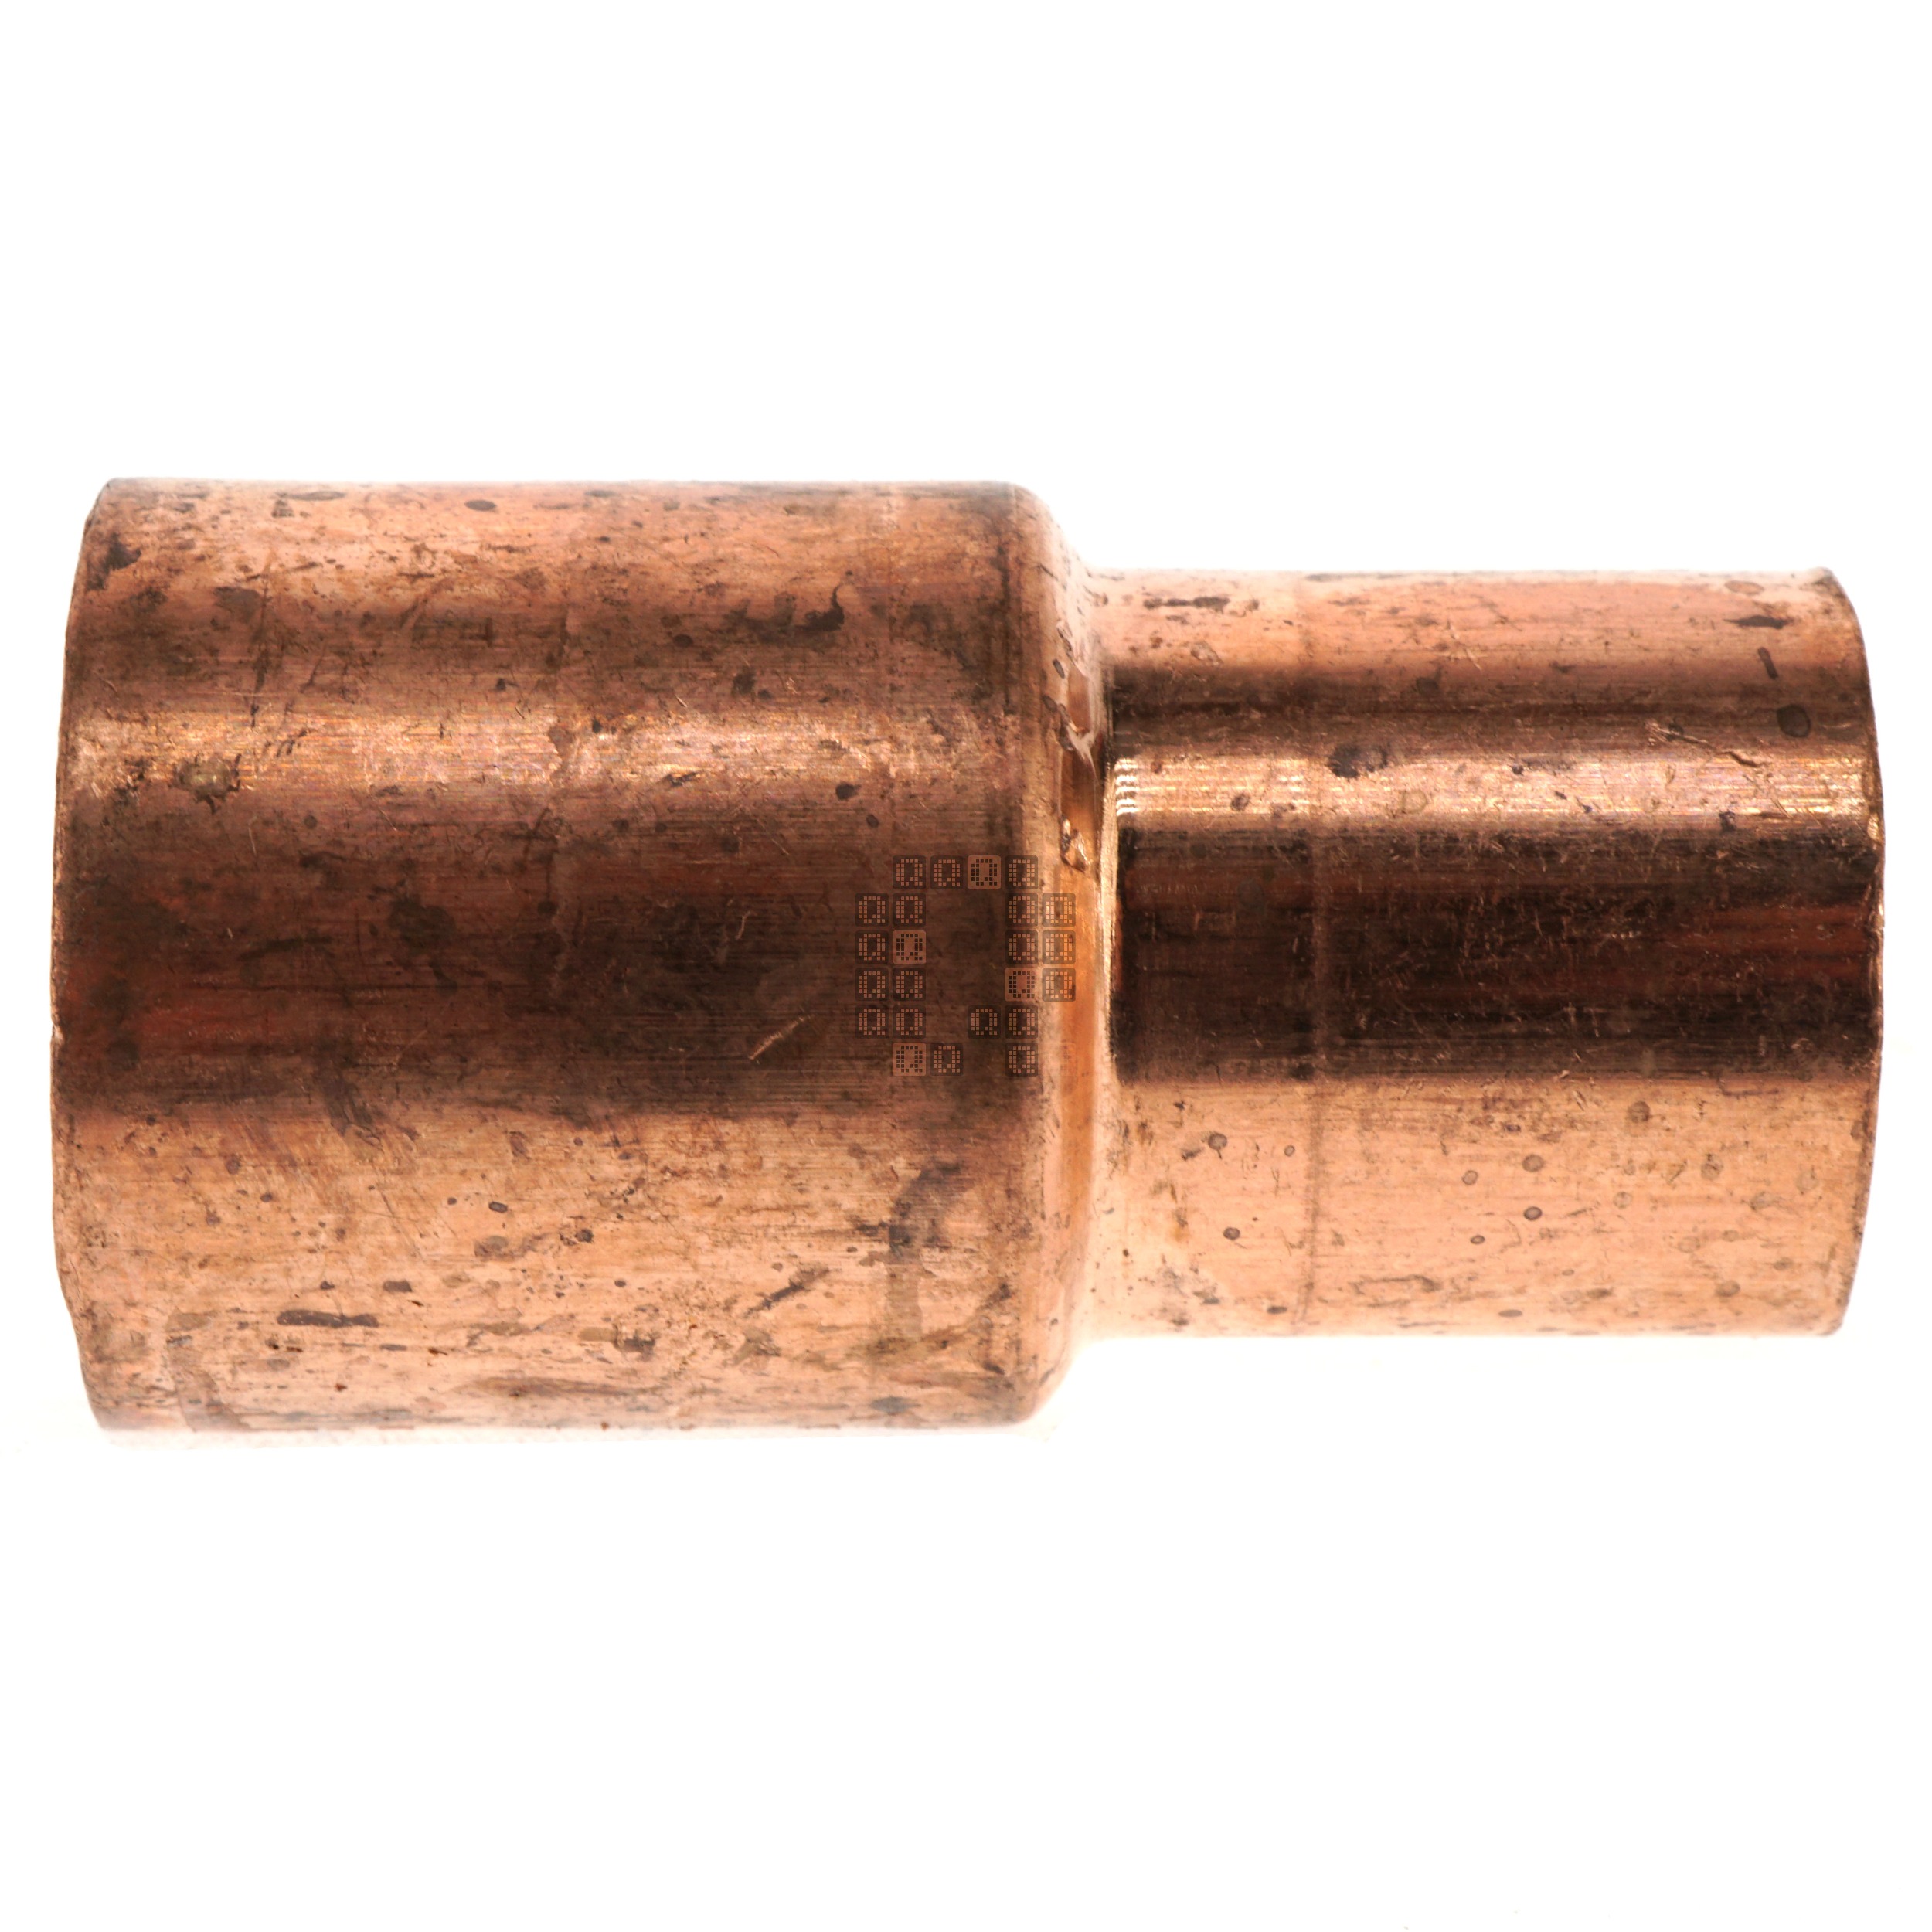 Elkhart Products (EPC) 32064 118 Series Copper Pipe Reducer, 3/4" x 1/2" , Sweat